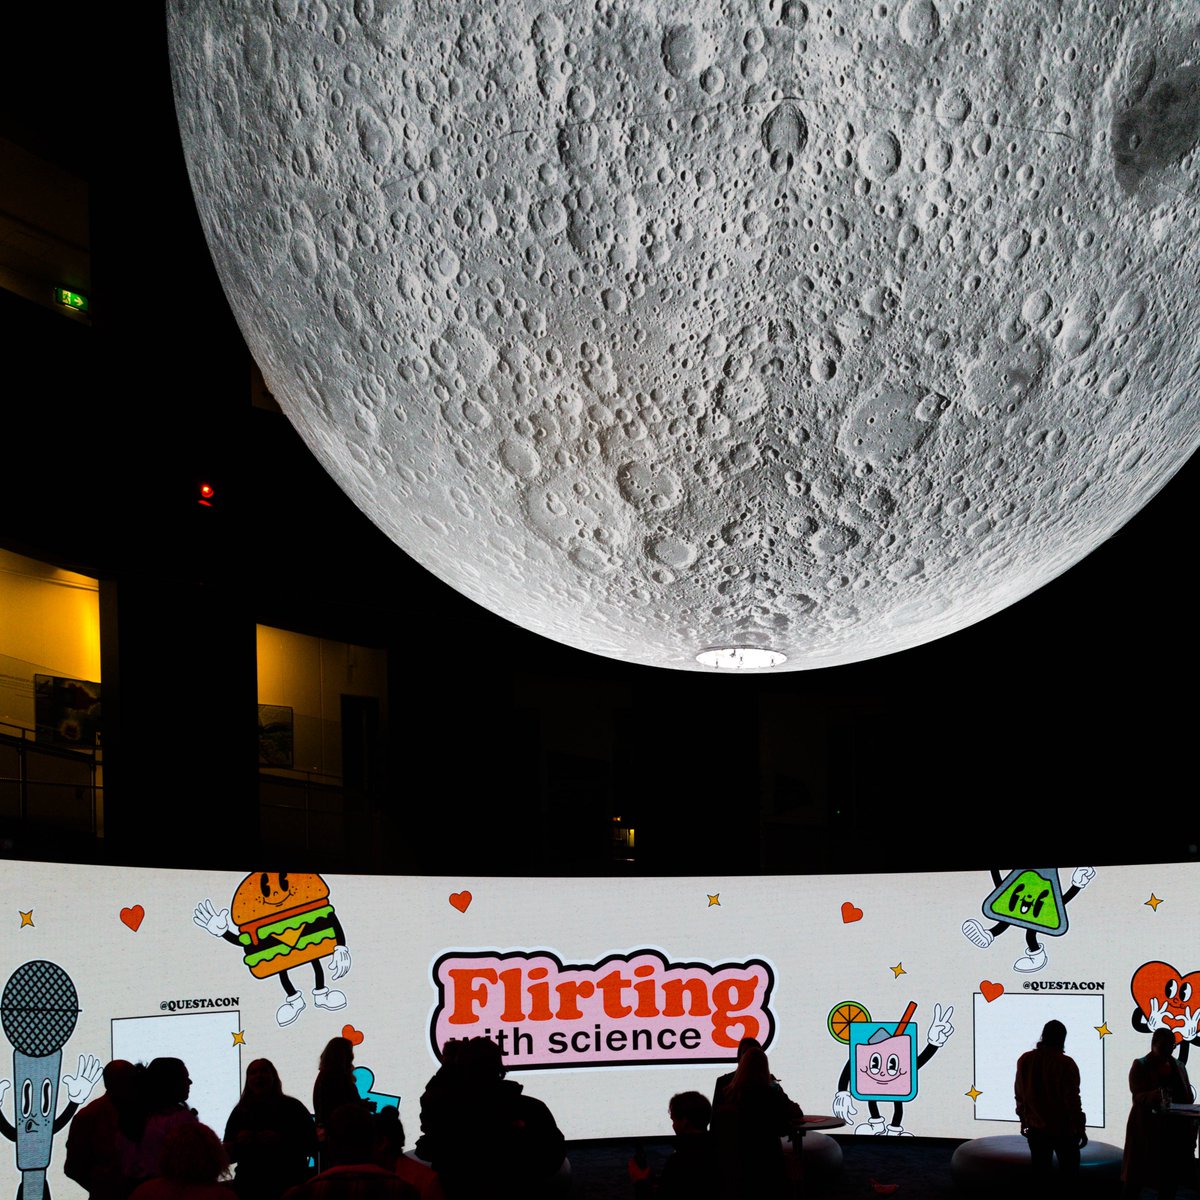 This Friday, Questacon is opening for an adults-only Flirting with Science. There are plenty of adult-only activities (think cocktails and MeridianACT's condom-applying competition!), well as many of Questacon's hands-on exhibits (without having to wait for the kids to finish).